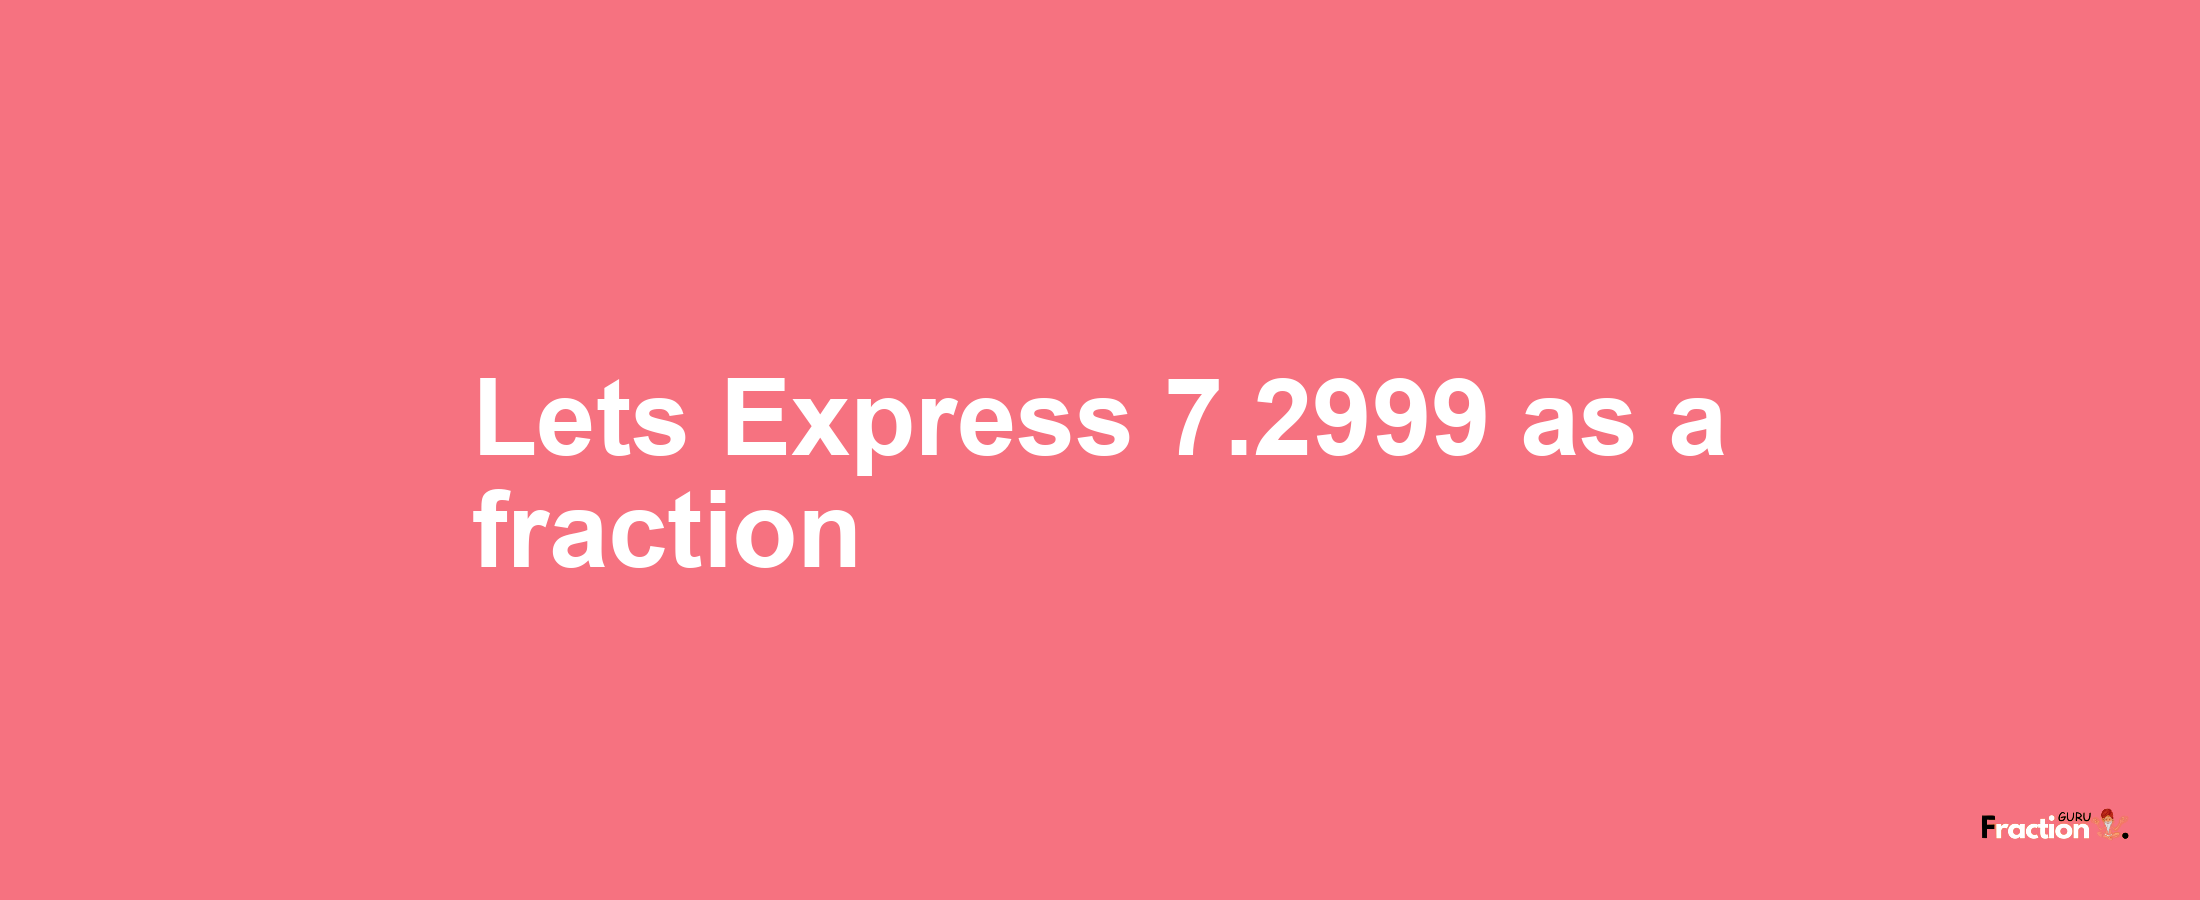 Lets Express 7.2999 as afraction